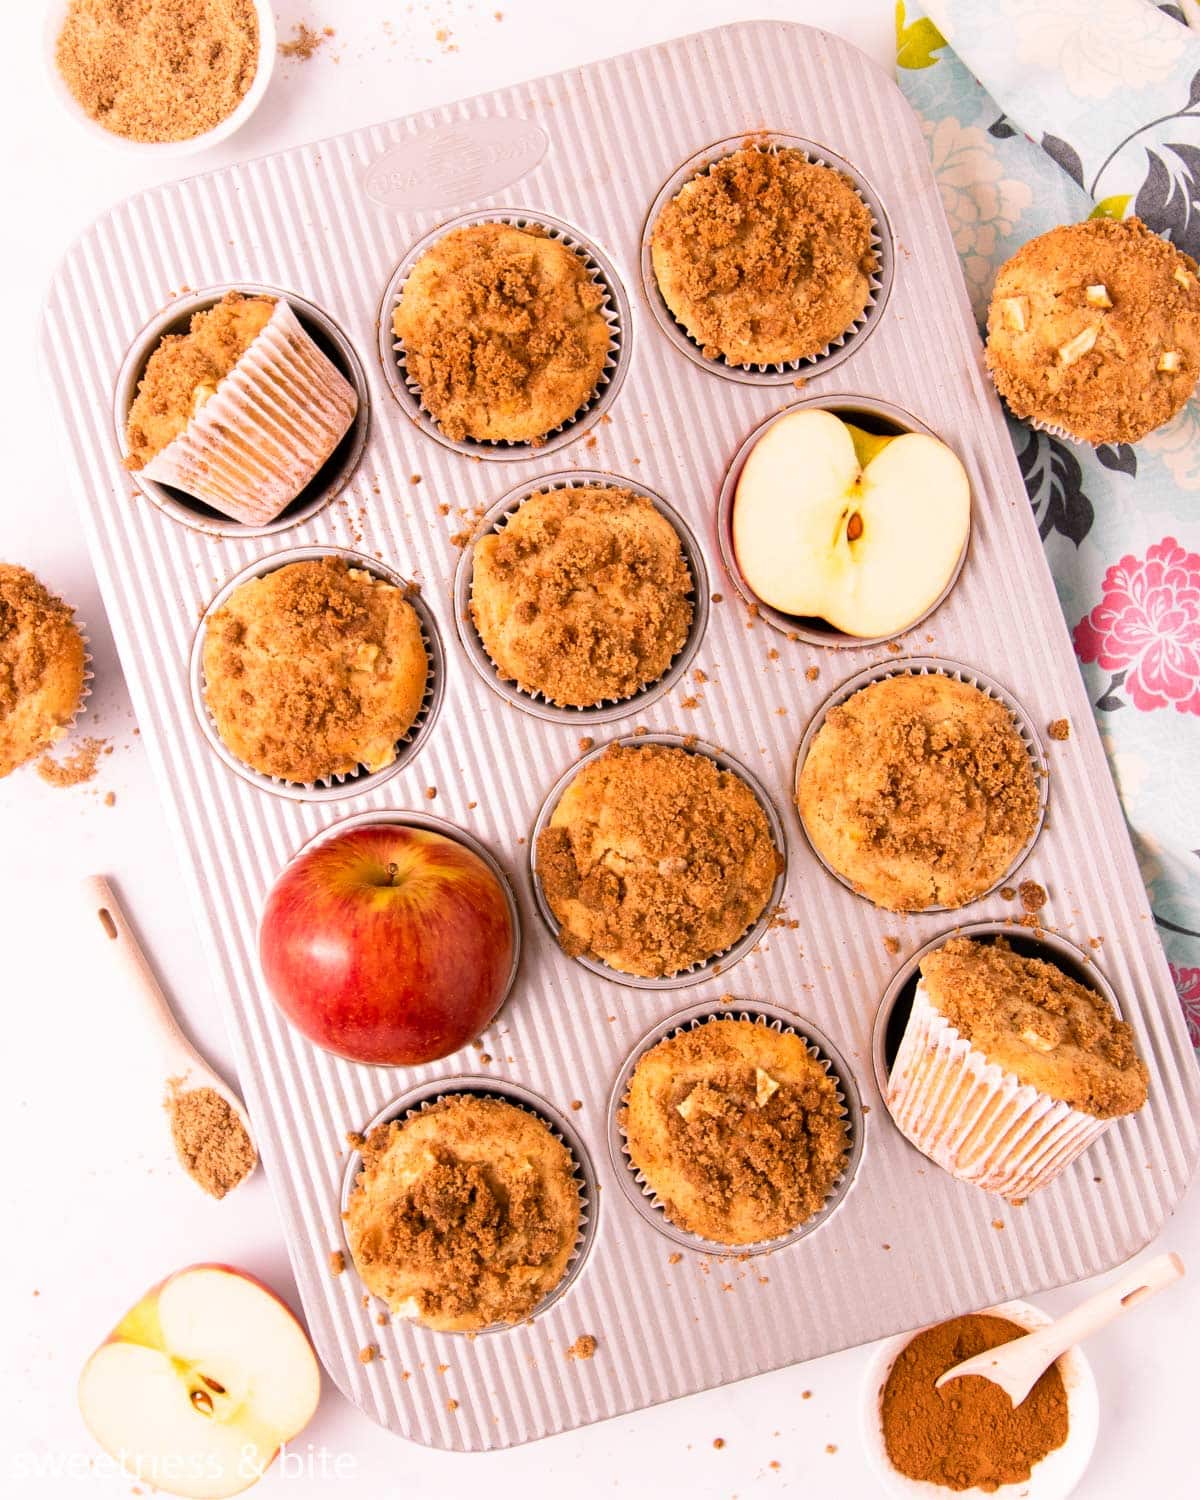 Gluten free apple muffins in a metal muffin pan, with a red apple and small dish of cinnamon streusel.